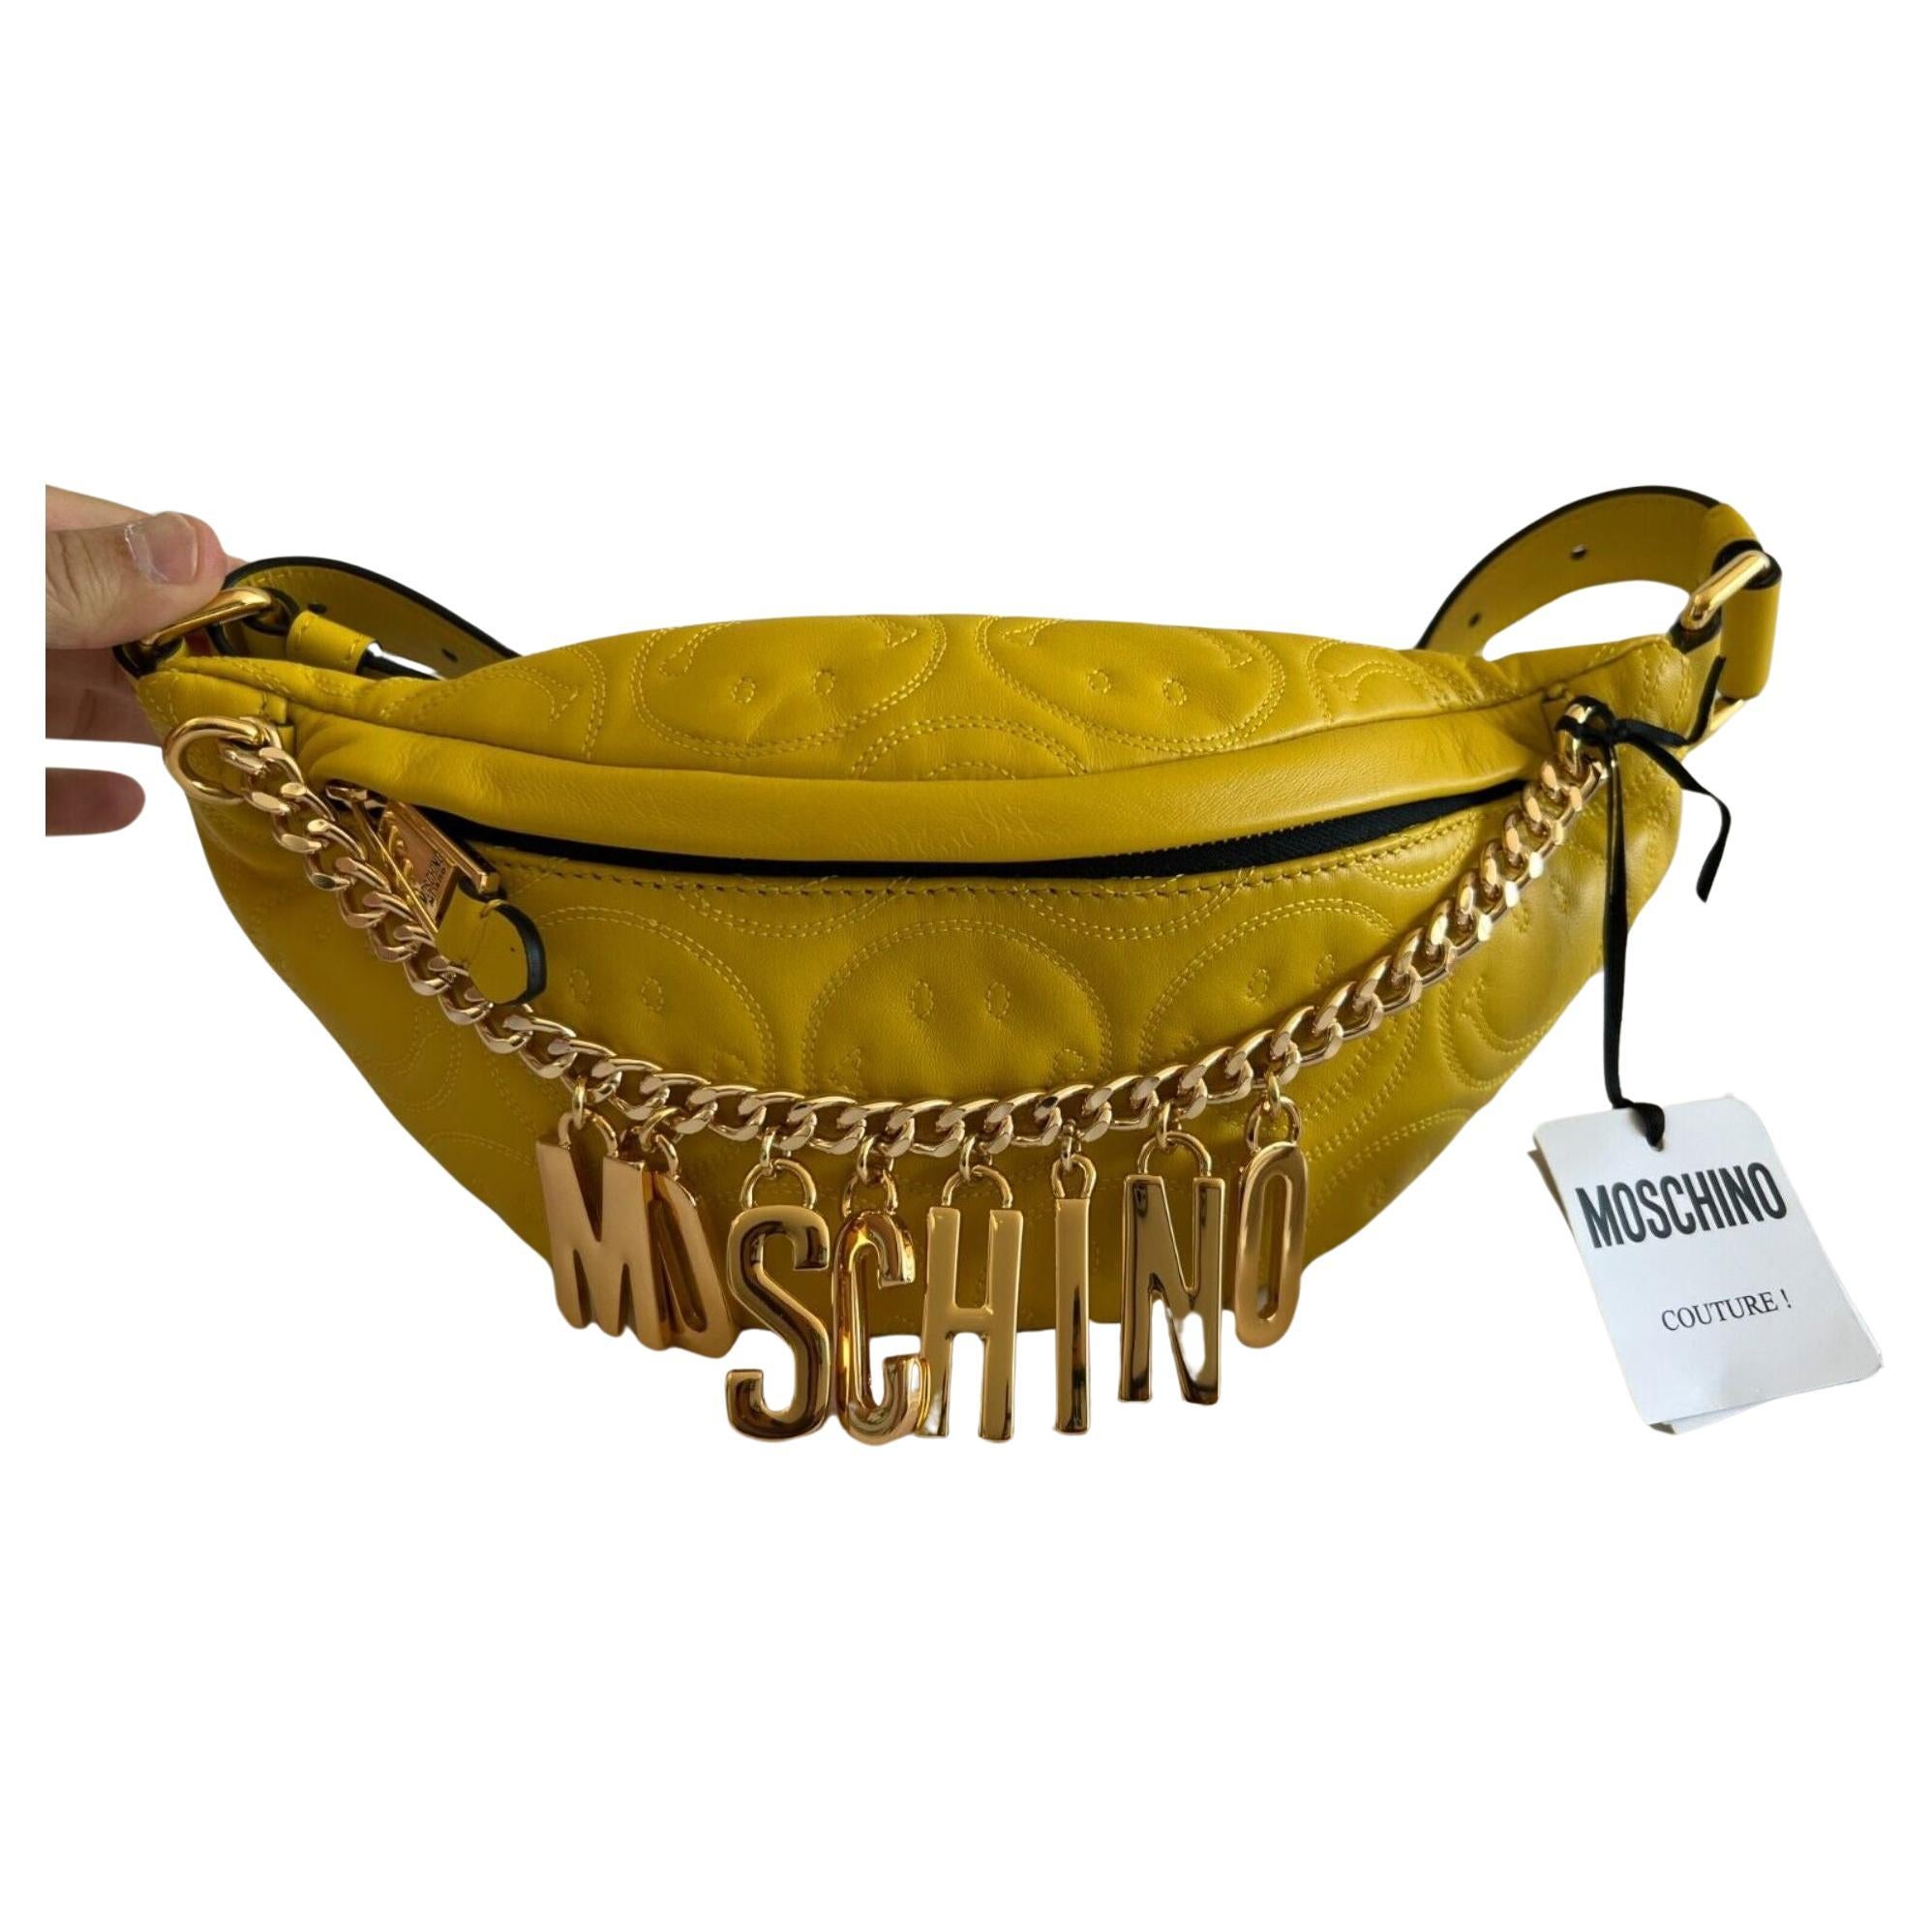 SS21 Moschino Couture Jeremy Scott Yellow Leather Fanny Pack w/ Engraved Smiley

Additional Information:
Material: Leather
Color: Yellow, Black
Size: Medium
Pattern: Smiley
Style: Belt Bag
Dimensions: H: 4